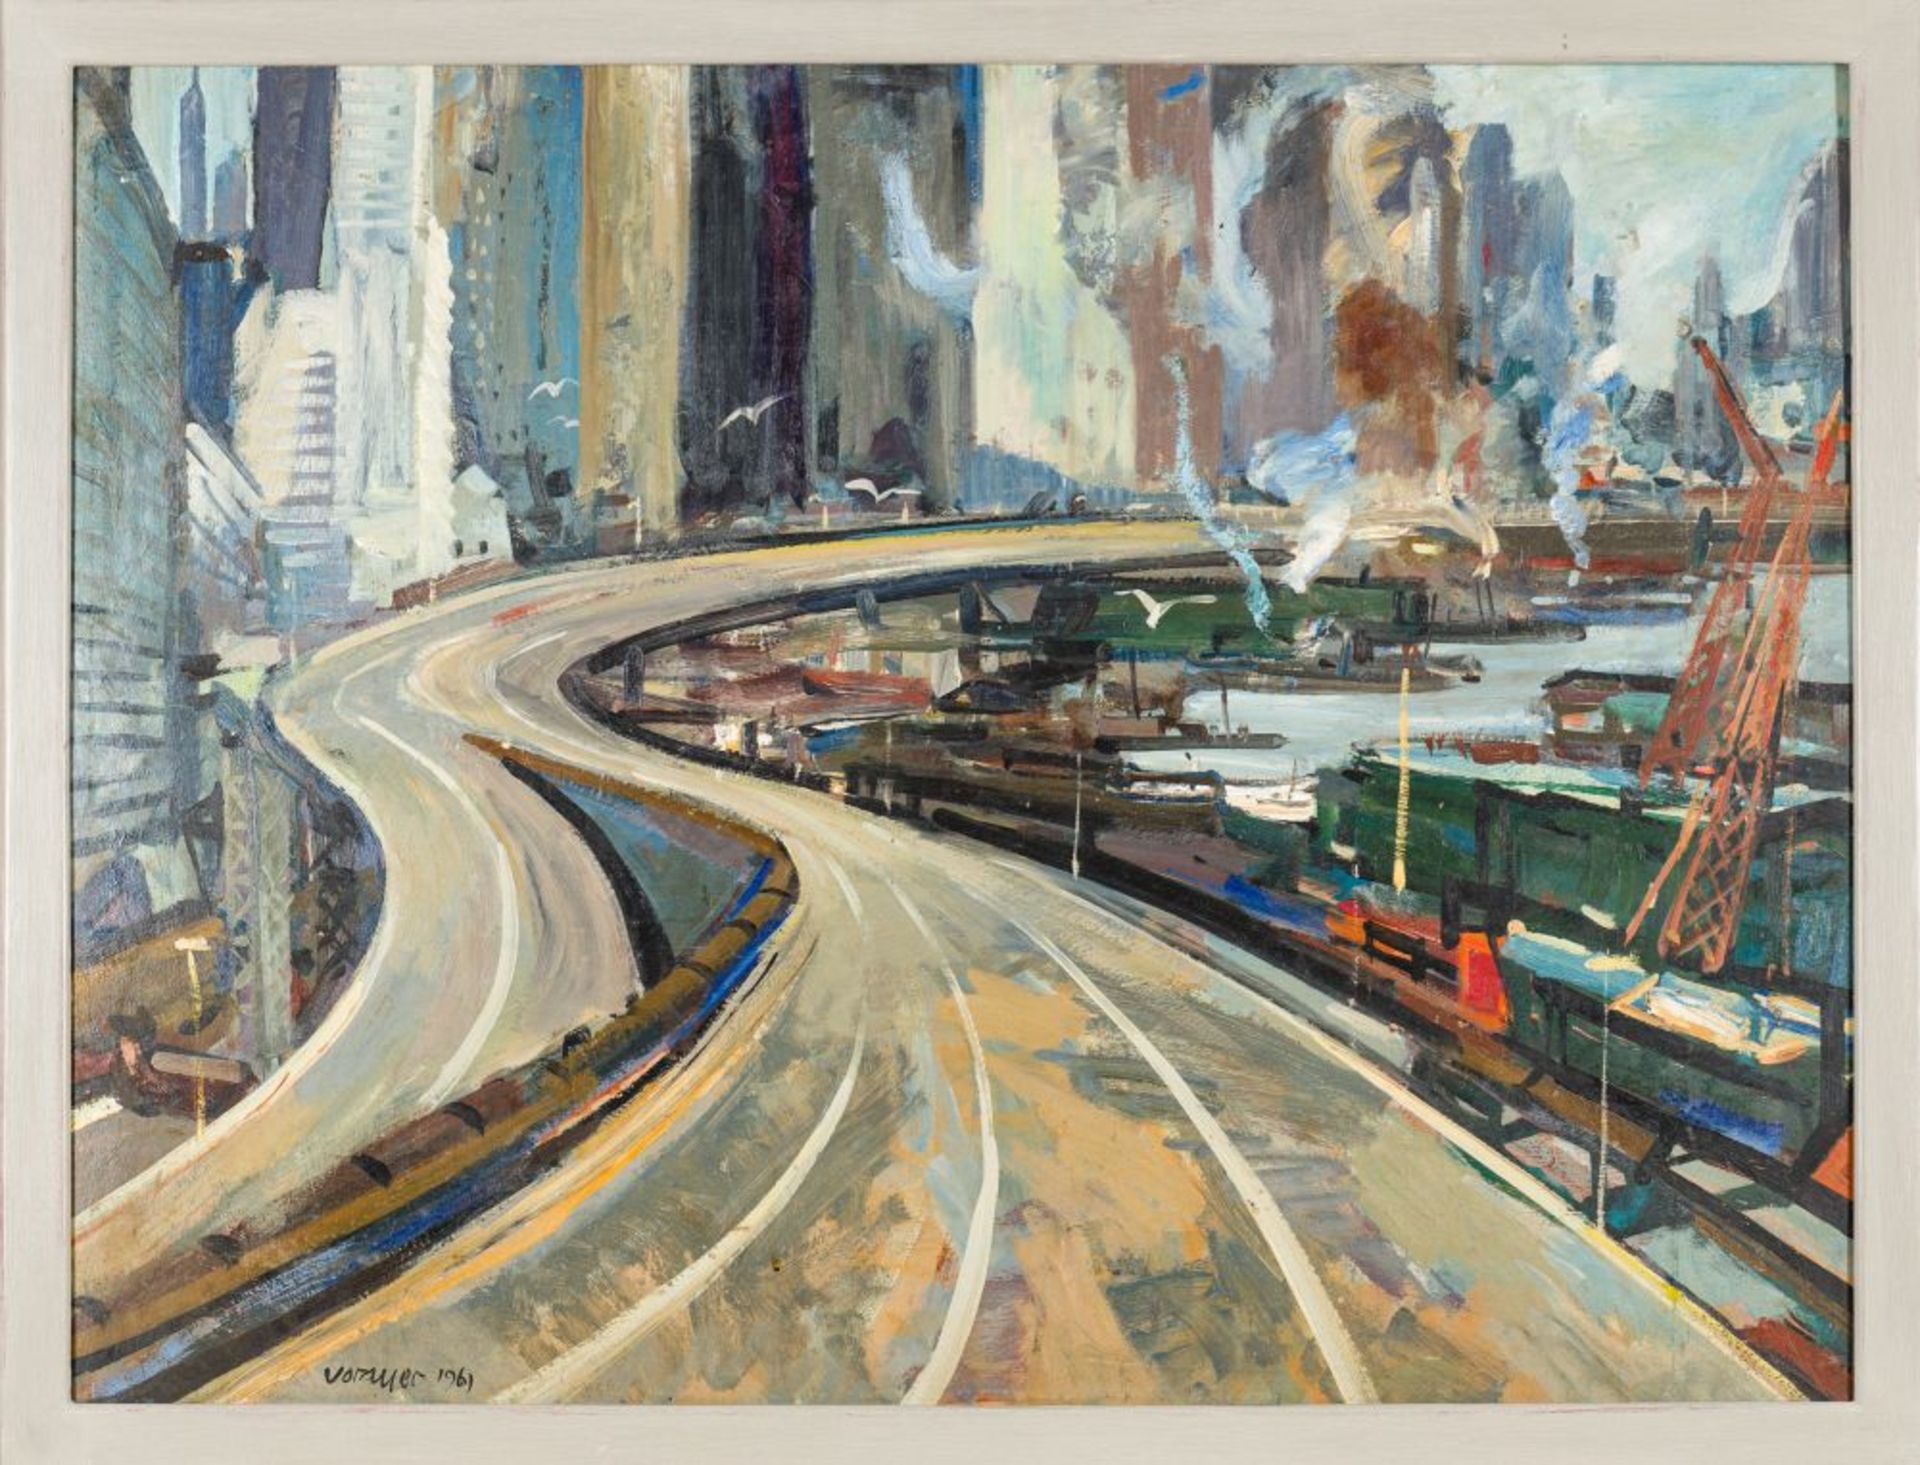 Big City Highway, 1961 Oil on Hardboard Signed and dated lower left 30,1 x 40 in framed - Image 2 of 4